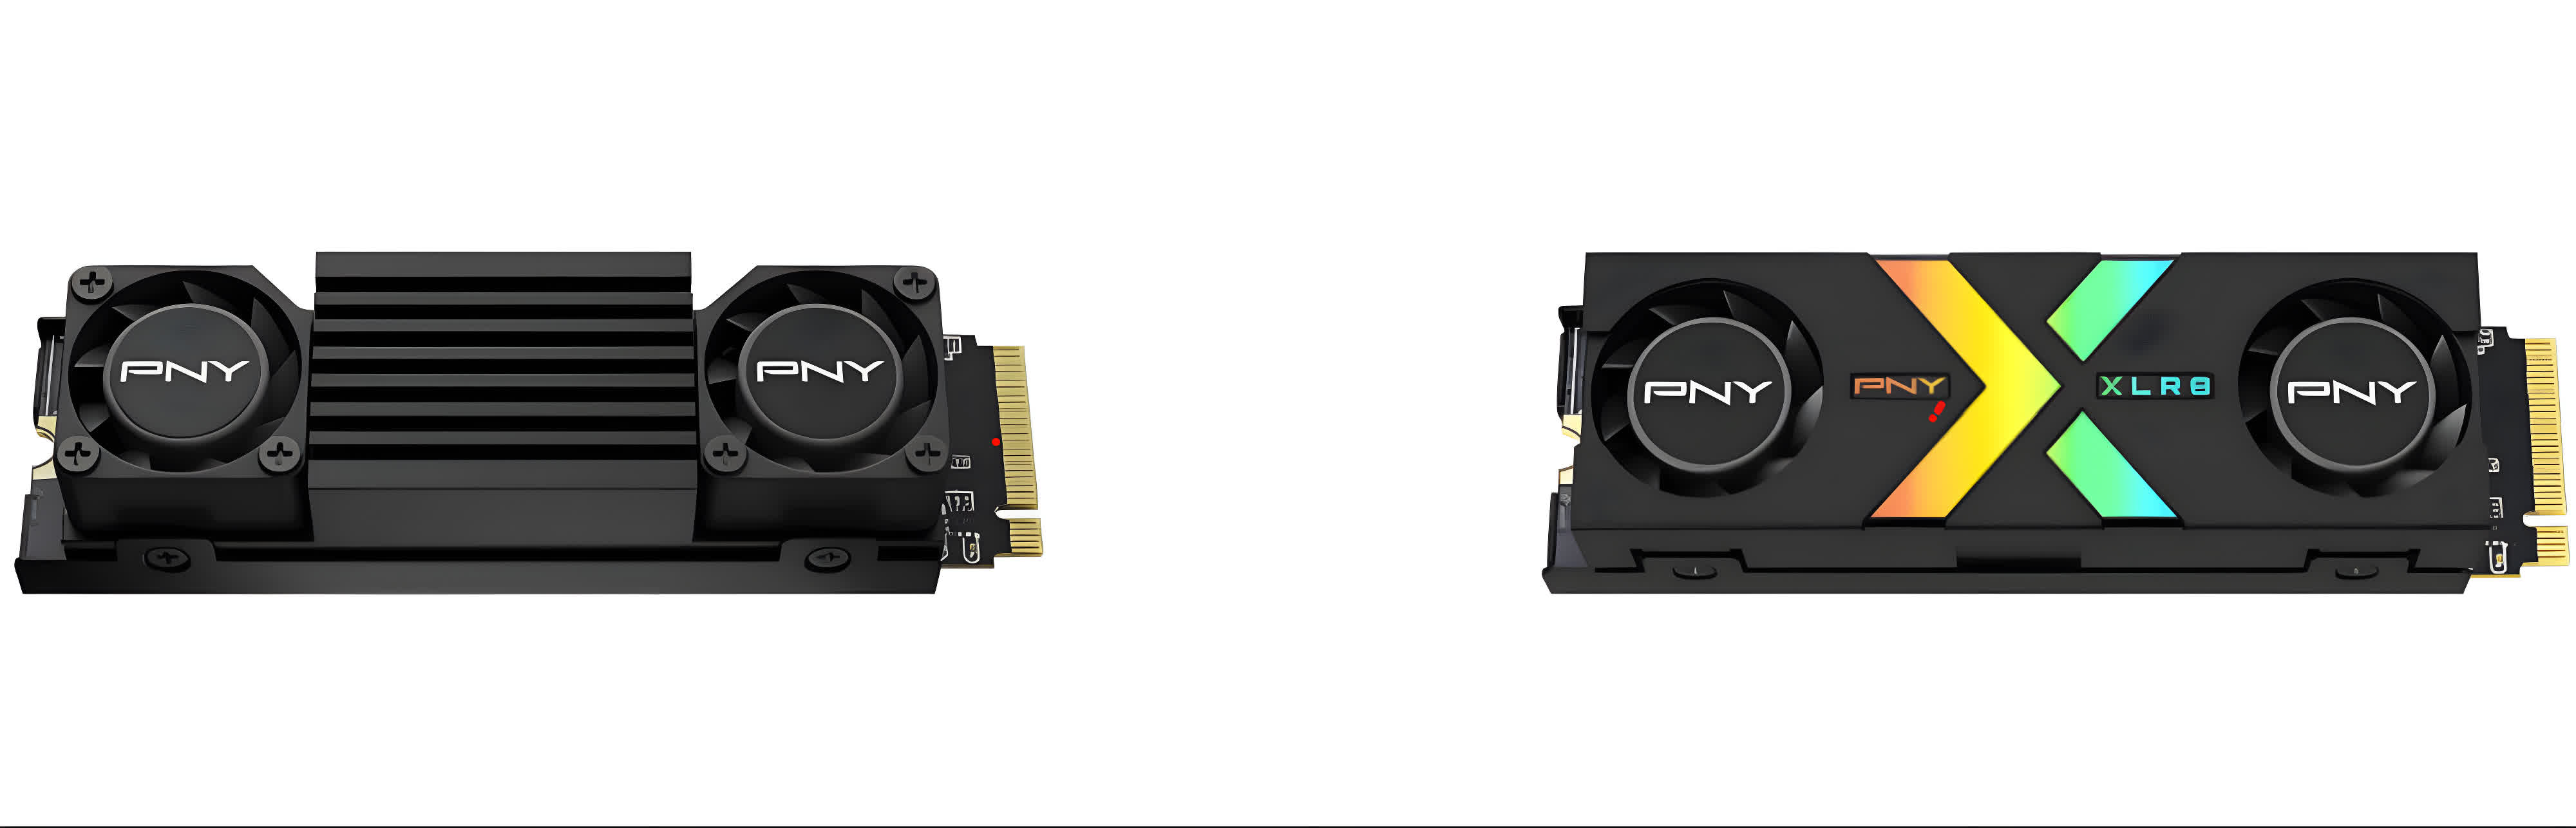 PNY unveils 12GB/s PCIe 5.0 SSD with dual cooling fans